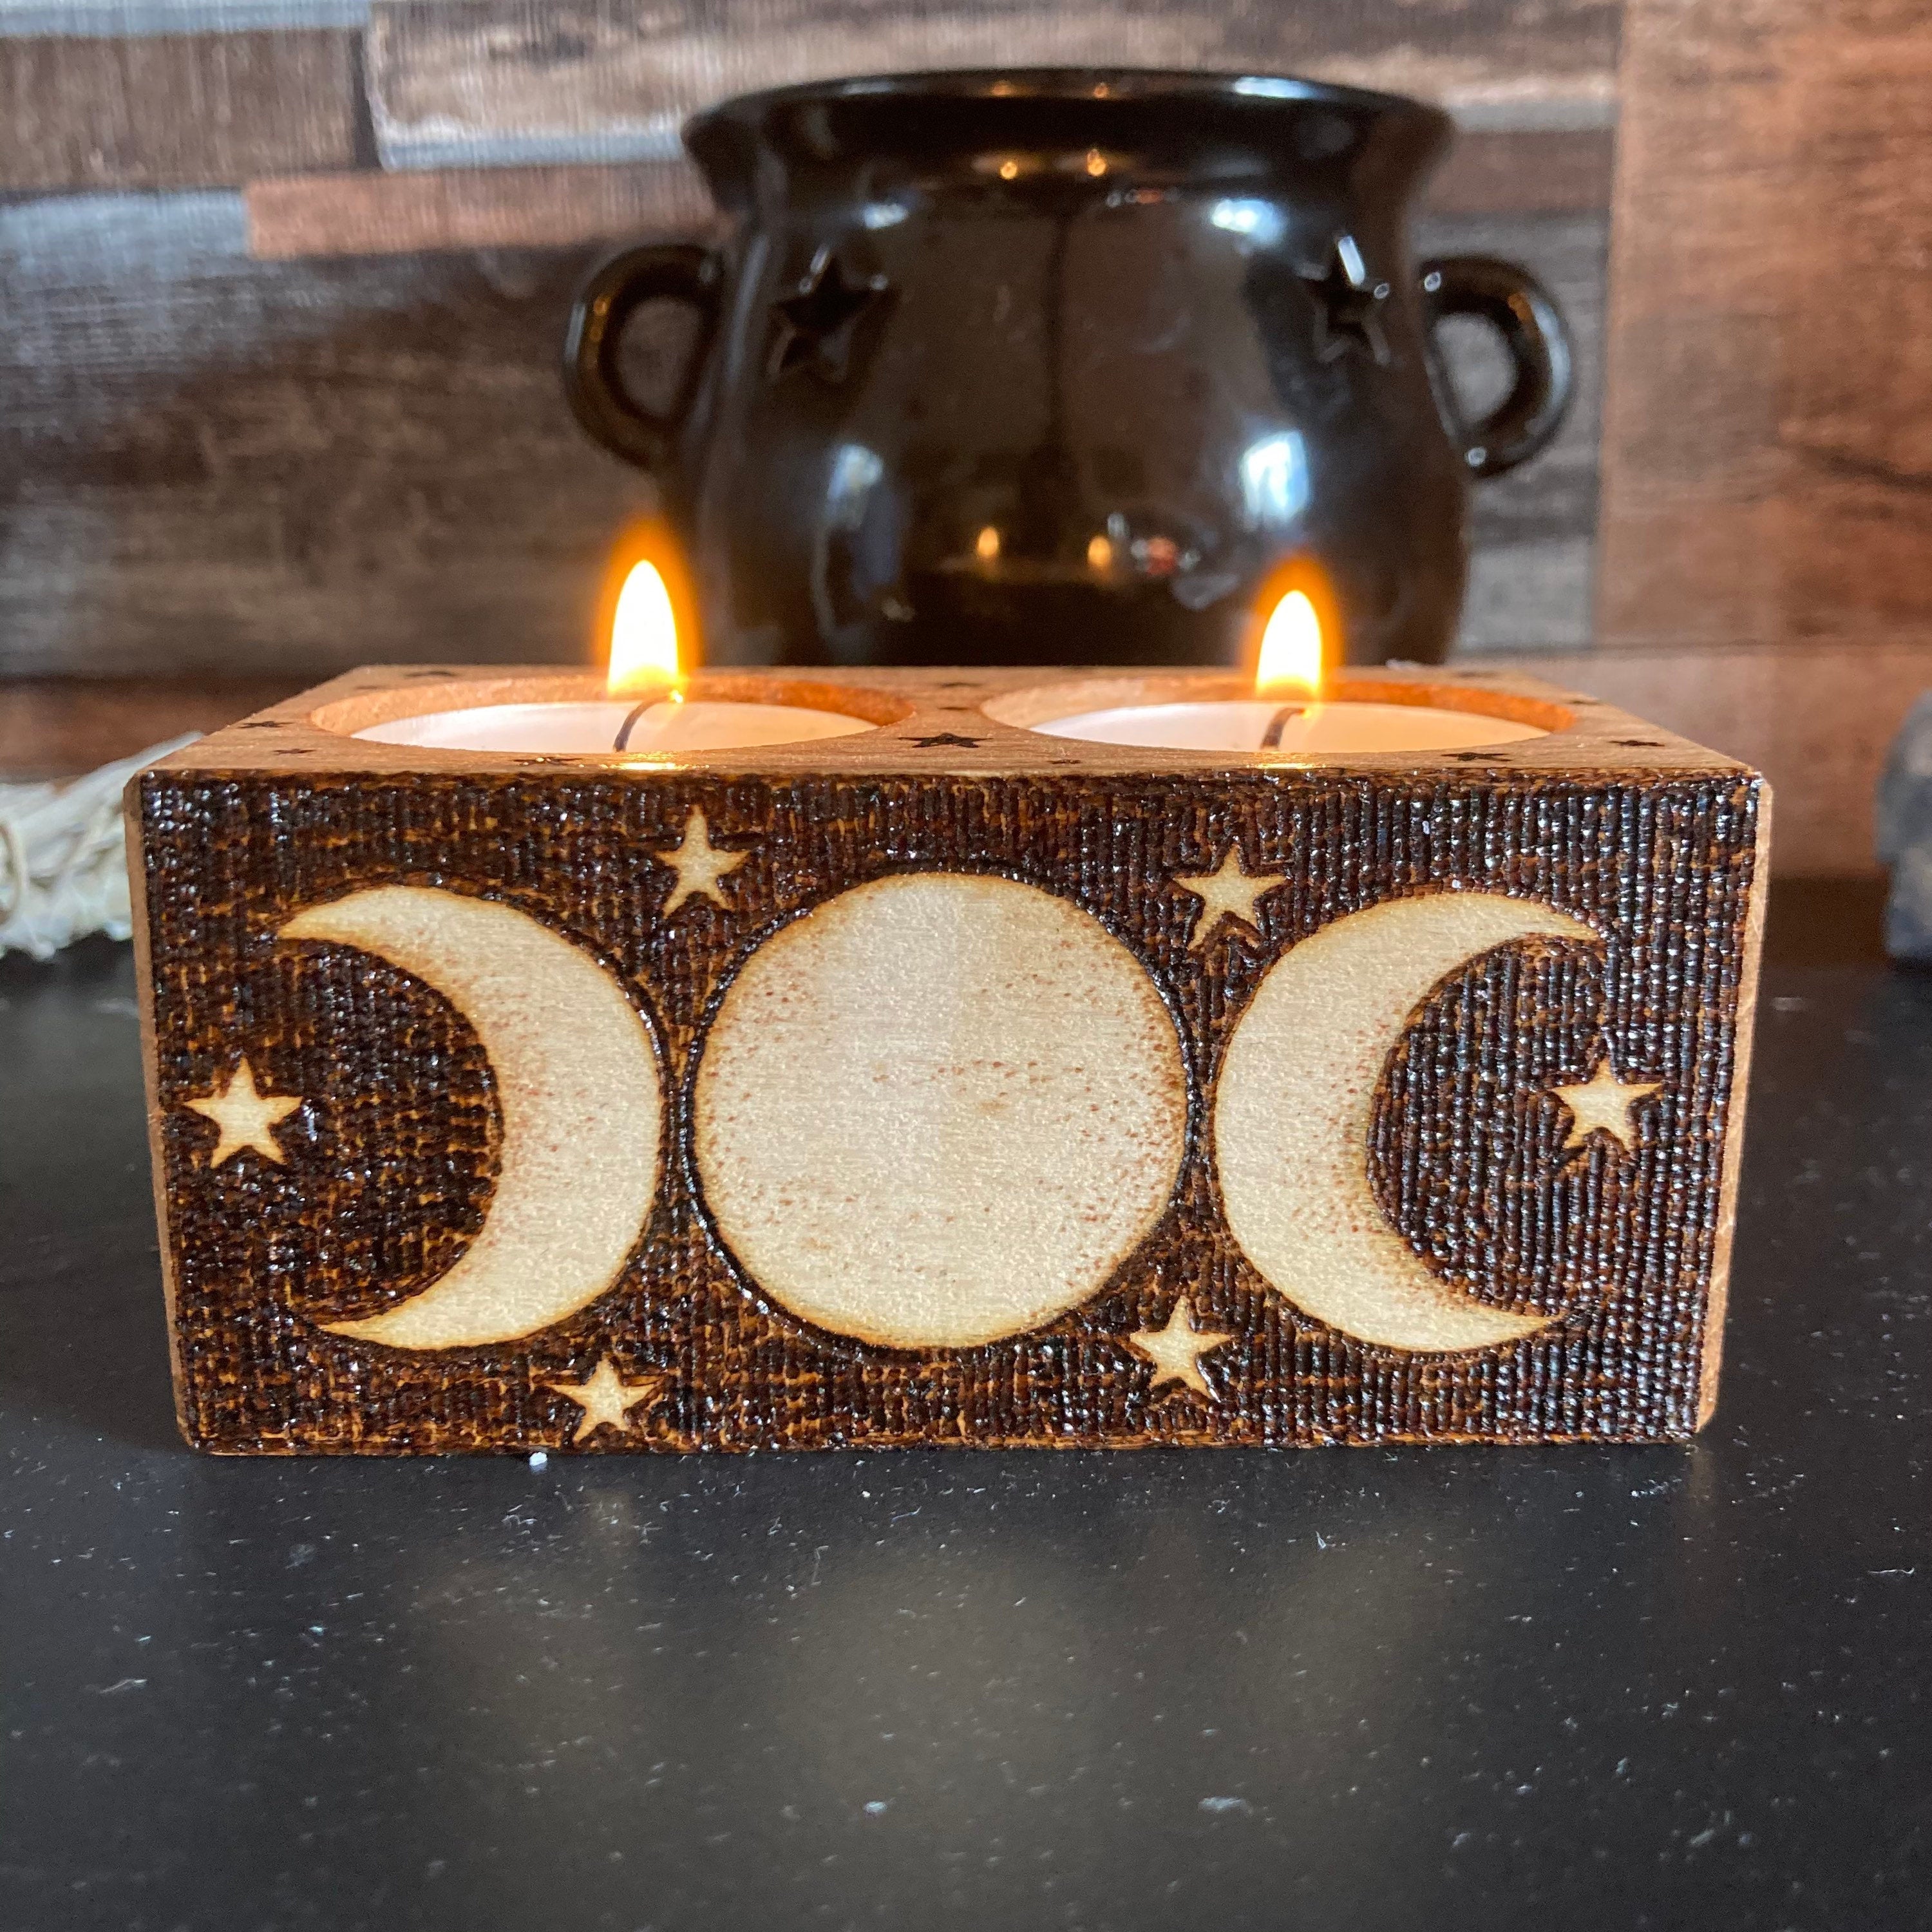 Lunar-Themed Candle Décor : Moon Phase Taper Candle Holder